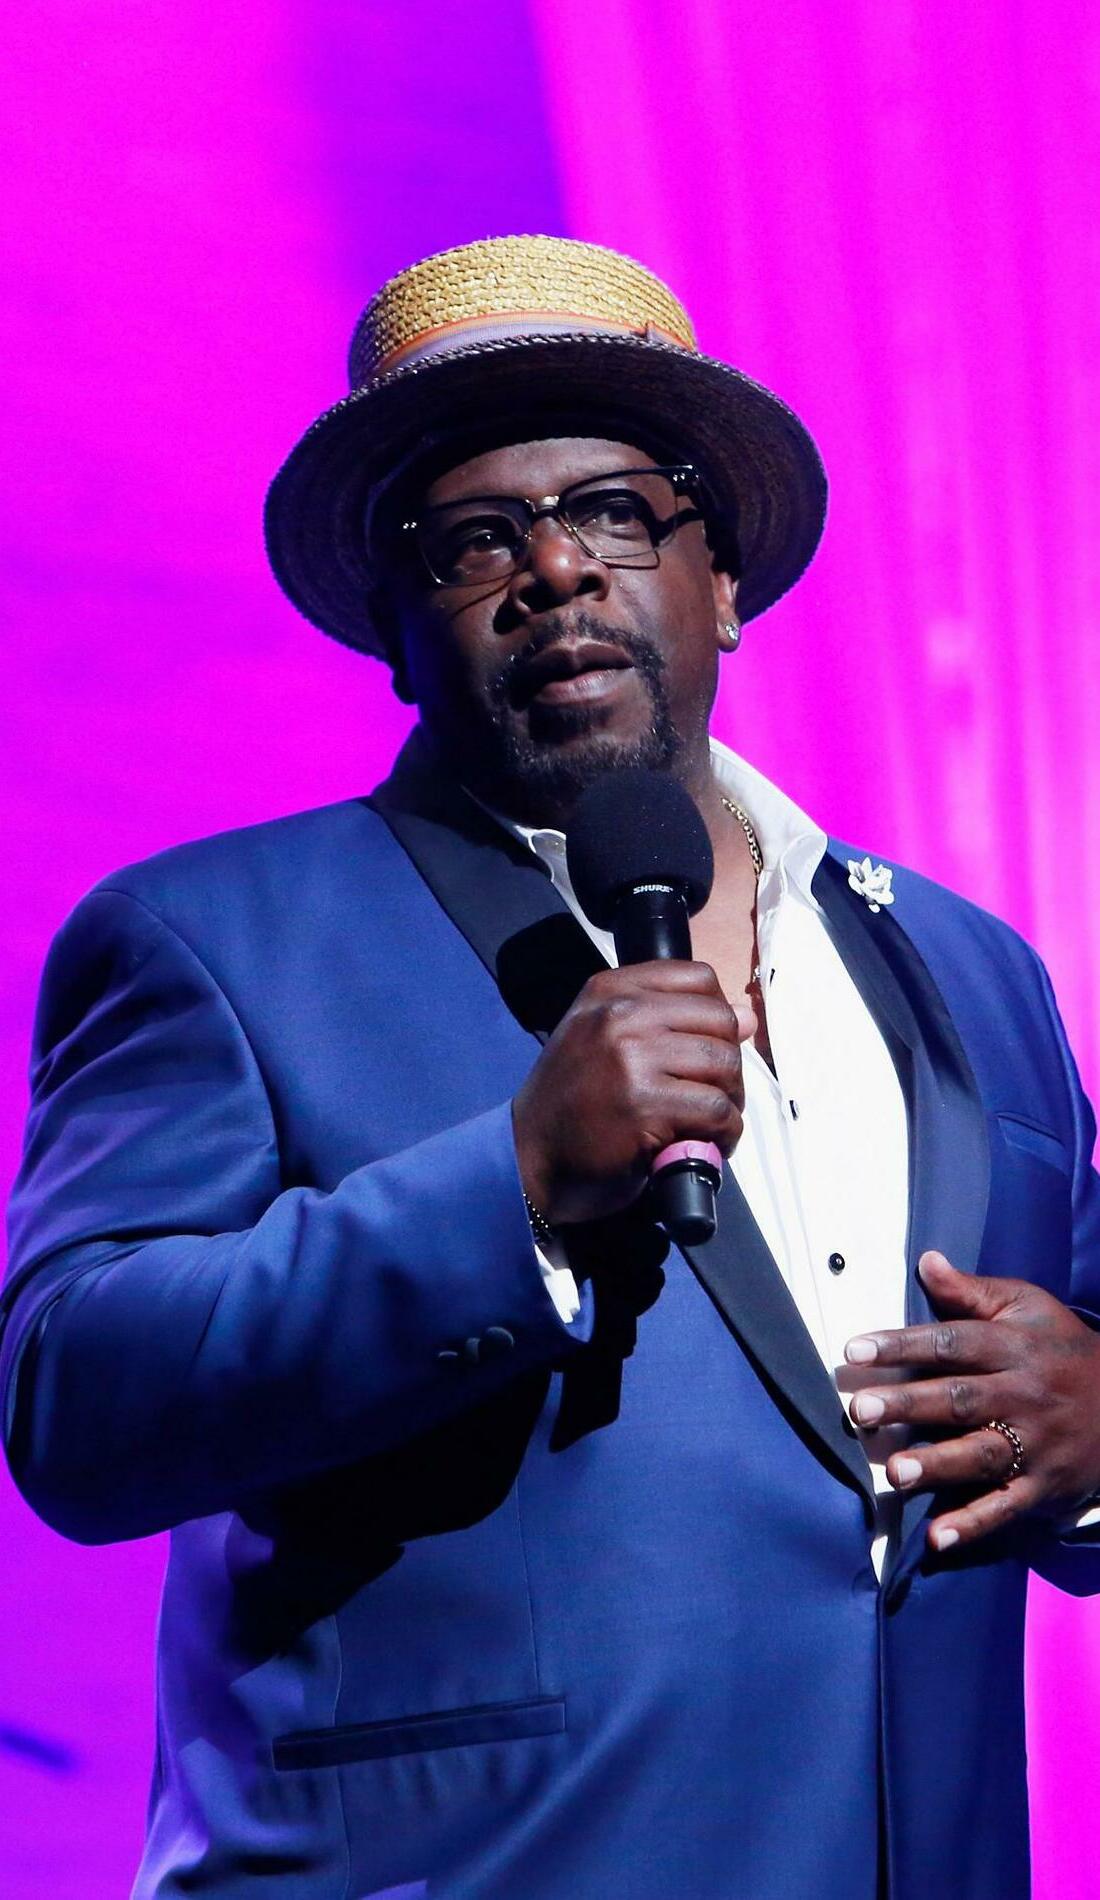 A Cedric the Entertainer live event